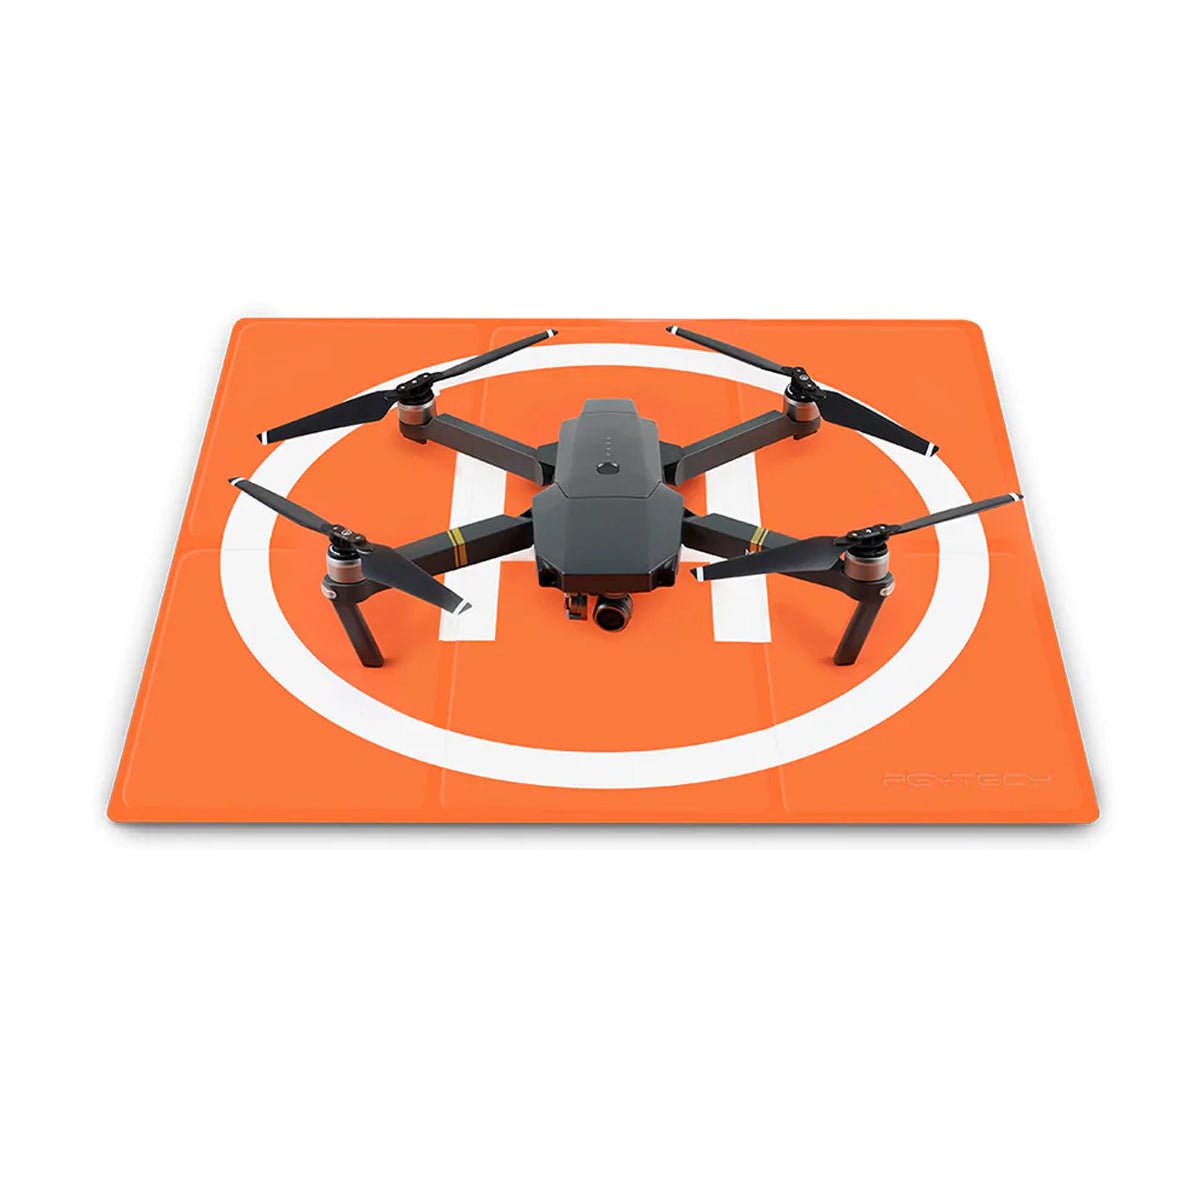 Landing Pad for FPV Drone, Rc Helicopters - Hobbymate Hobby